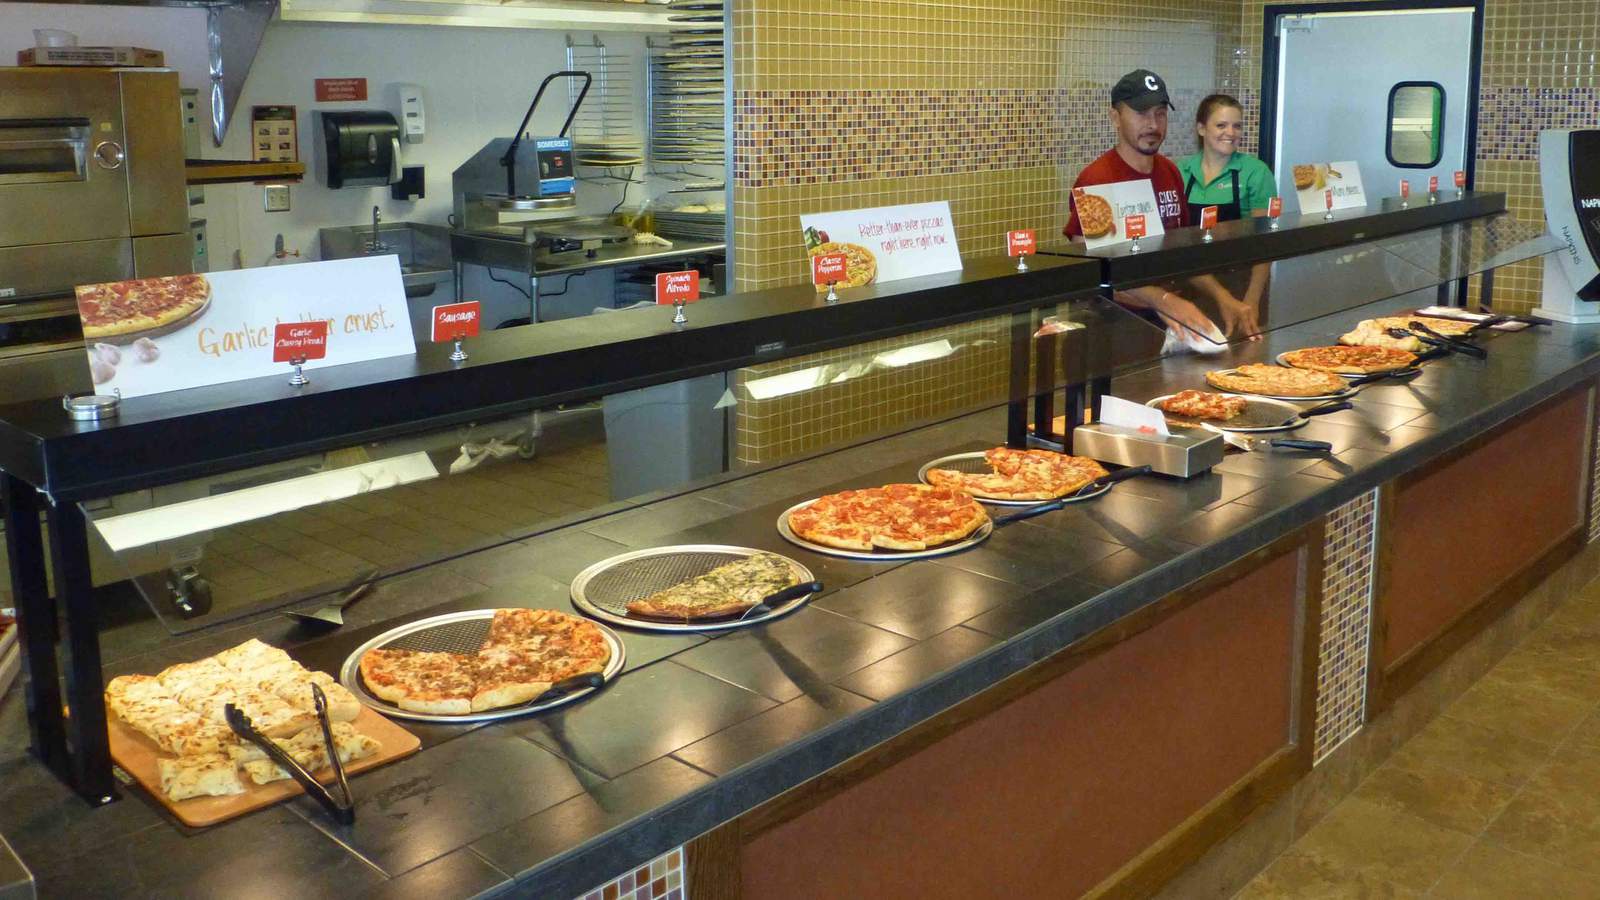 All-you-can-eat pizza buffet Cici’s files for bankruptcy